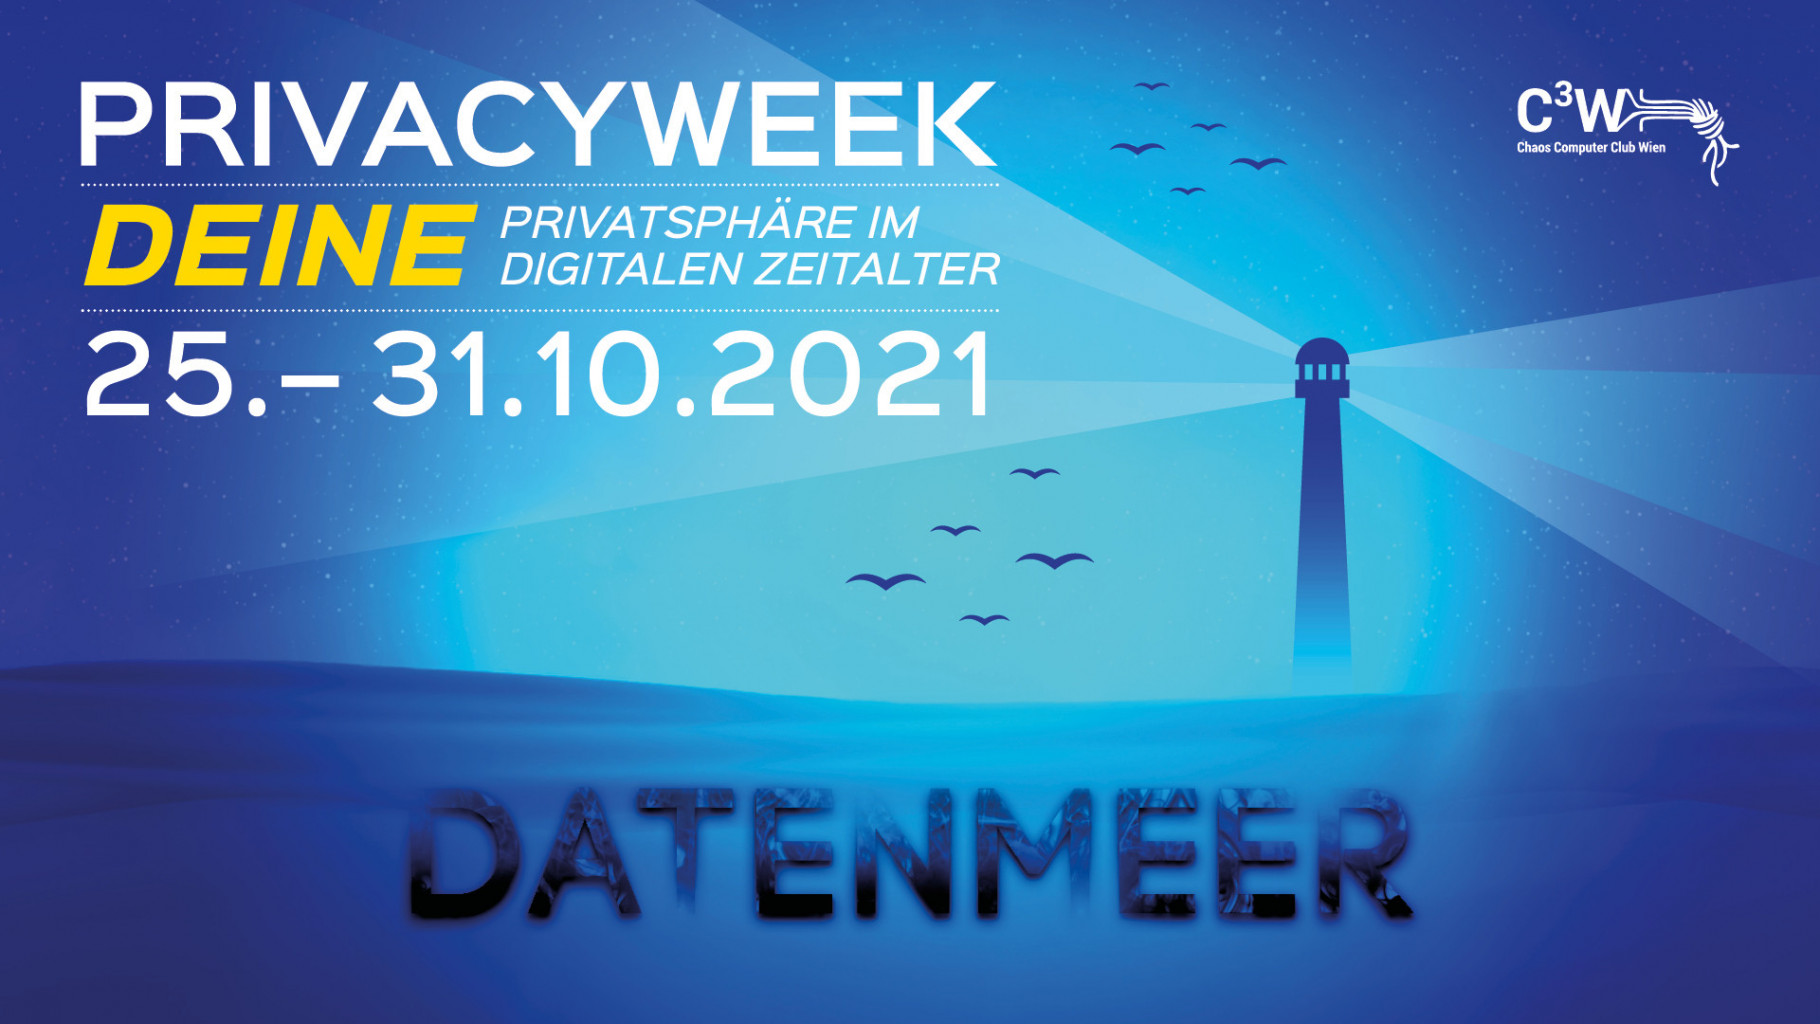 PrivacyWeek: Call for Participation